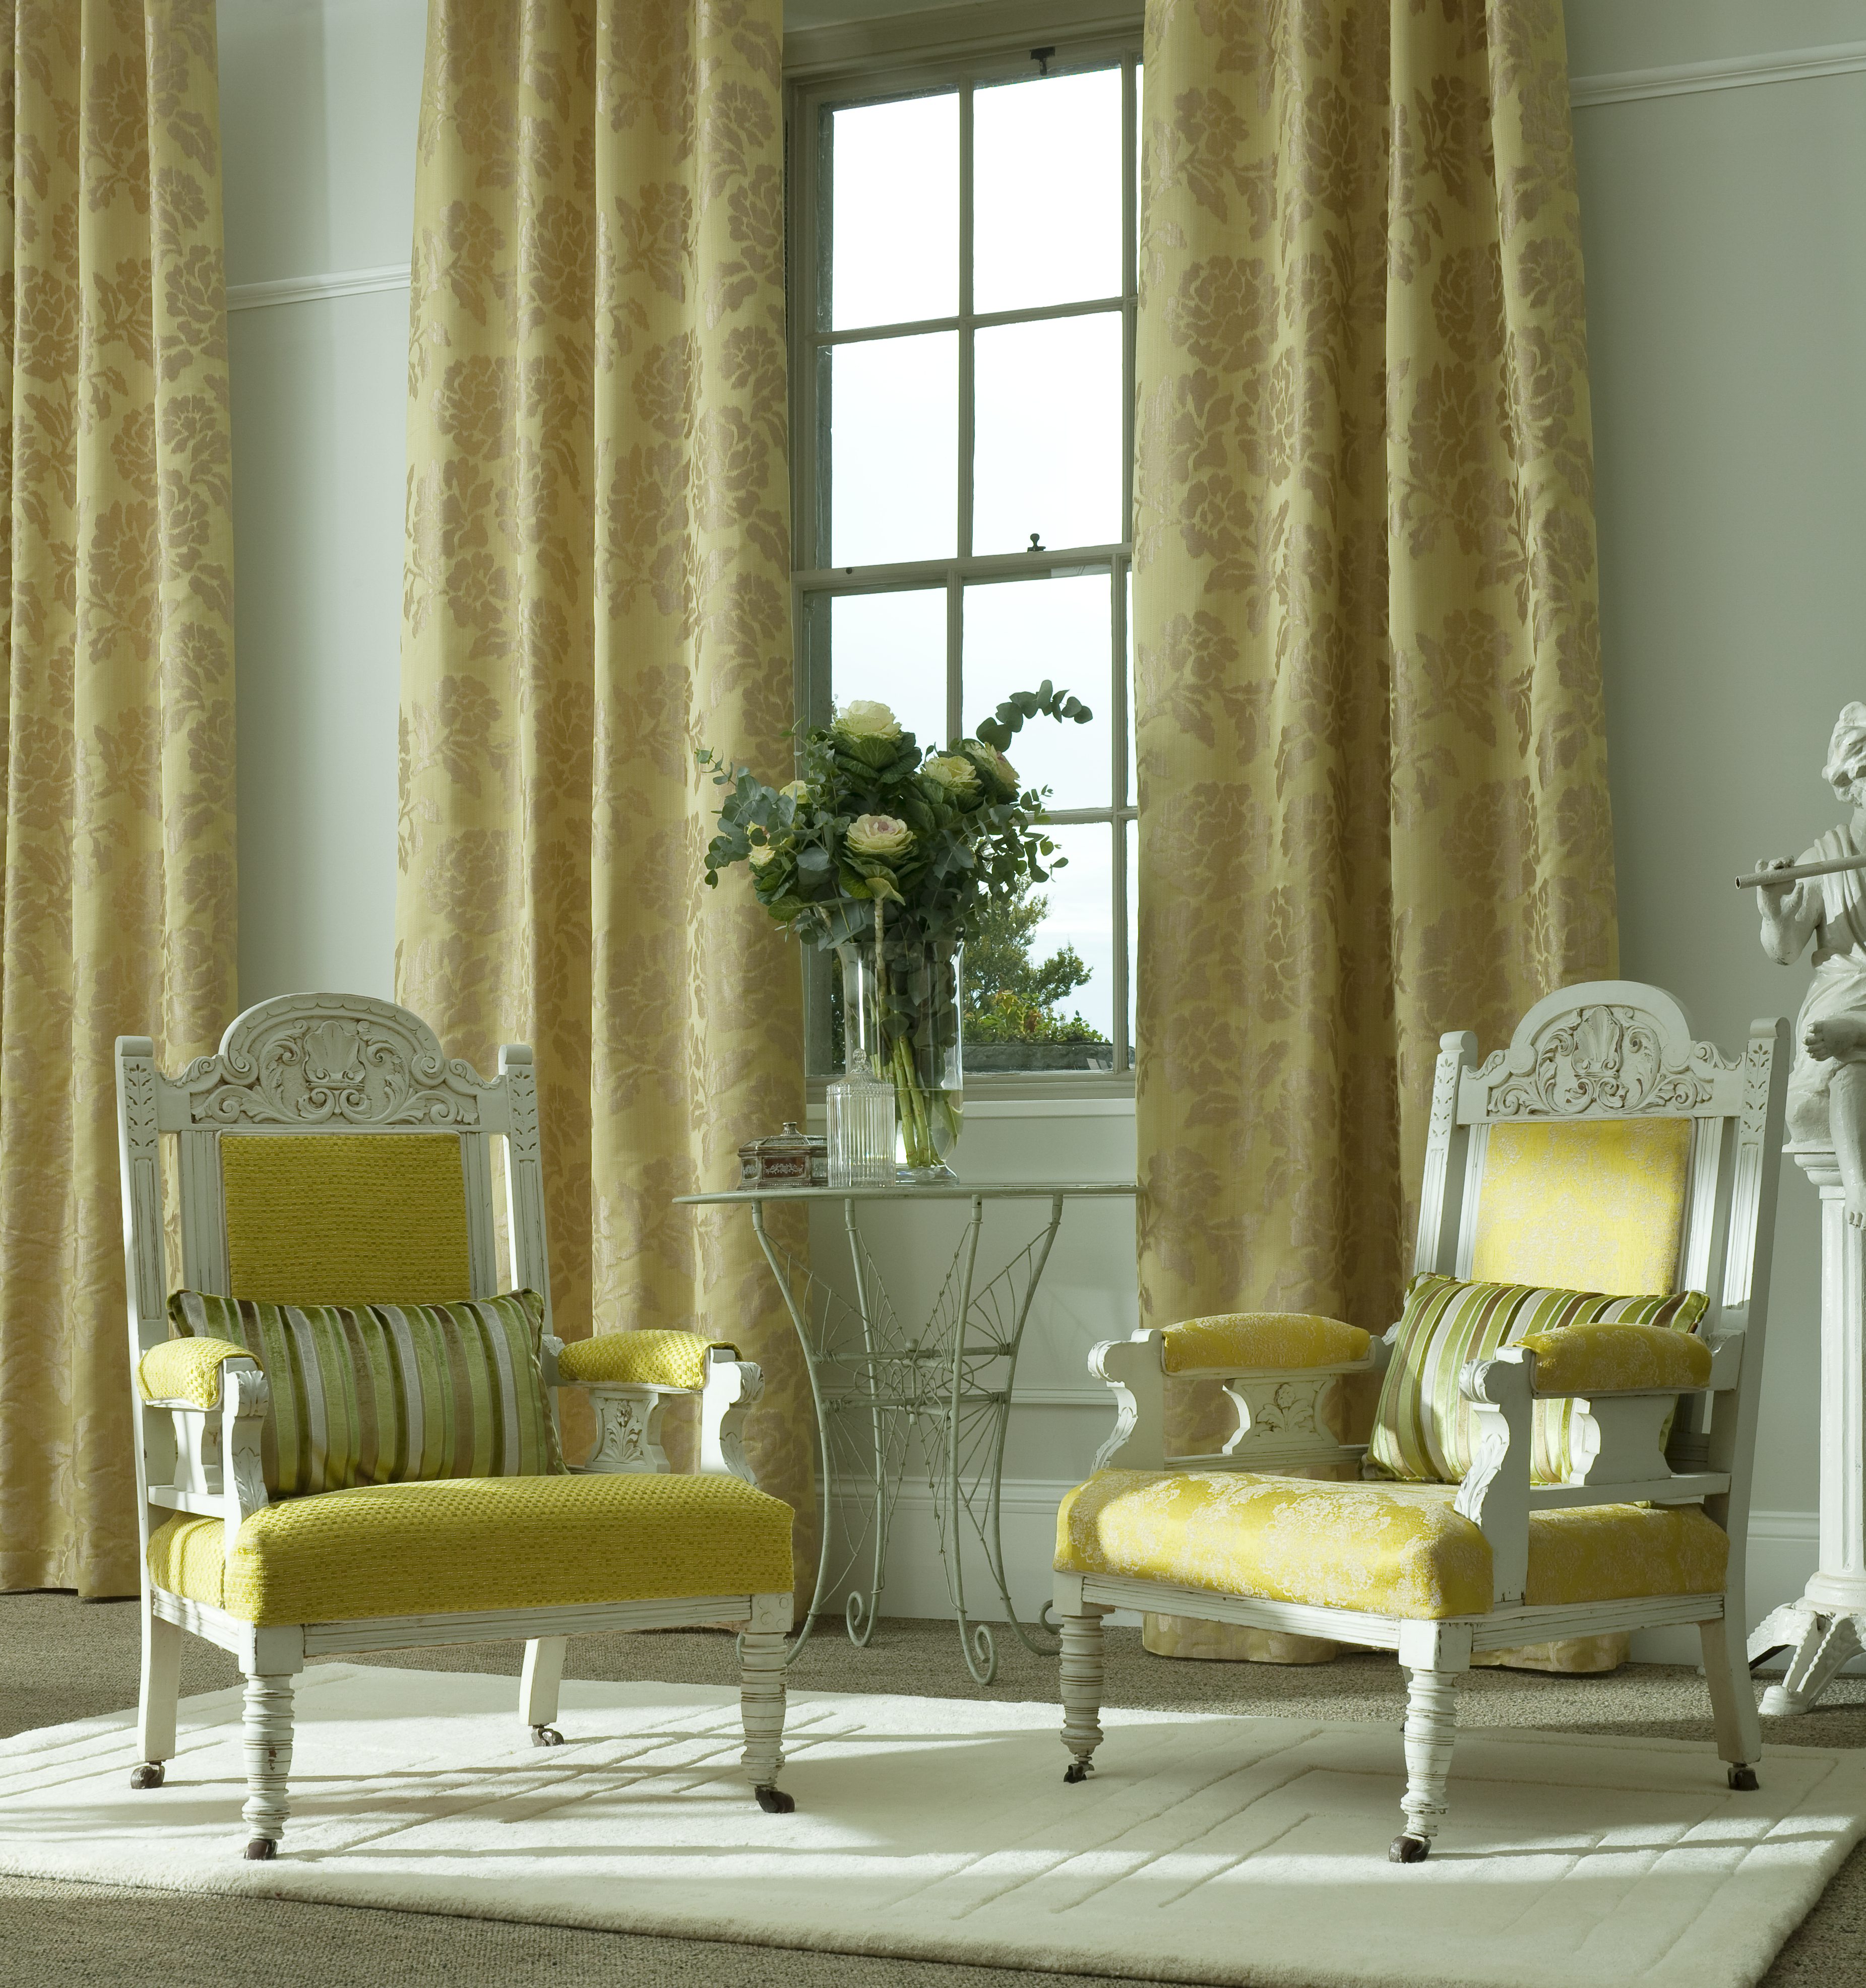 The Ultimate Guide To Choosing Curtains For Every Room